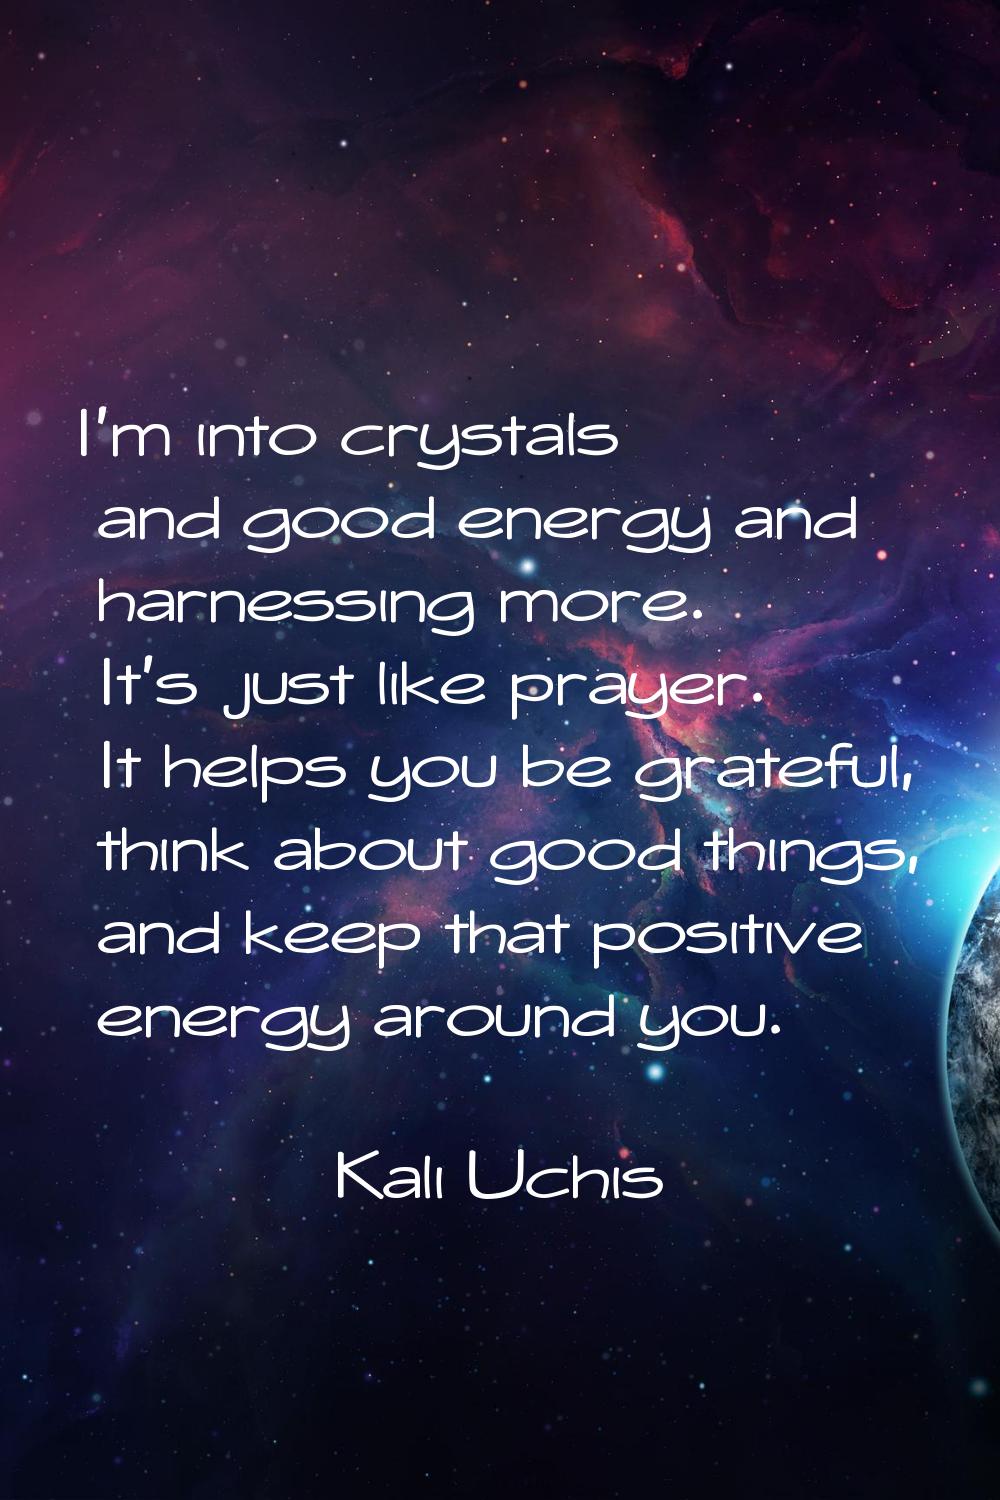 I'm into crystals and good energy and harnessing more. It's just like prayer. It helps you be grate